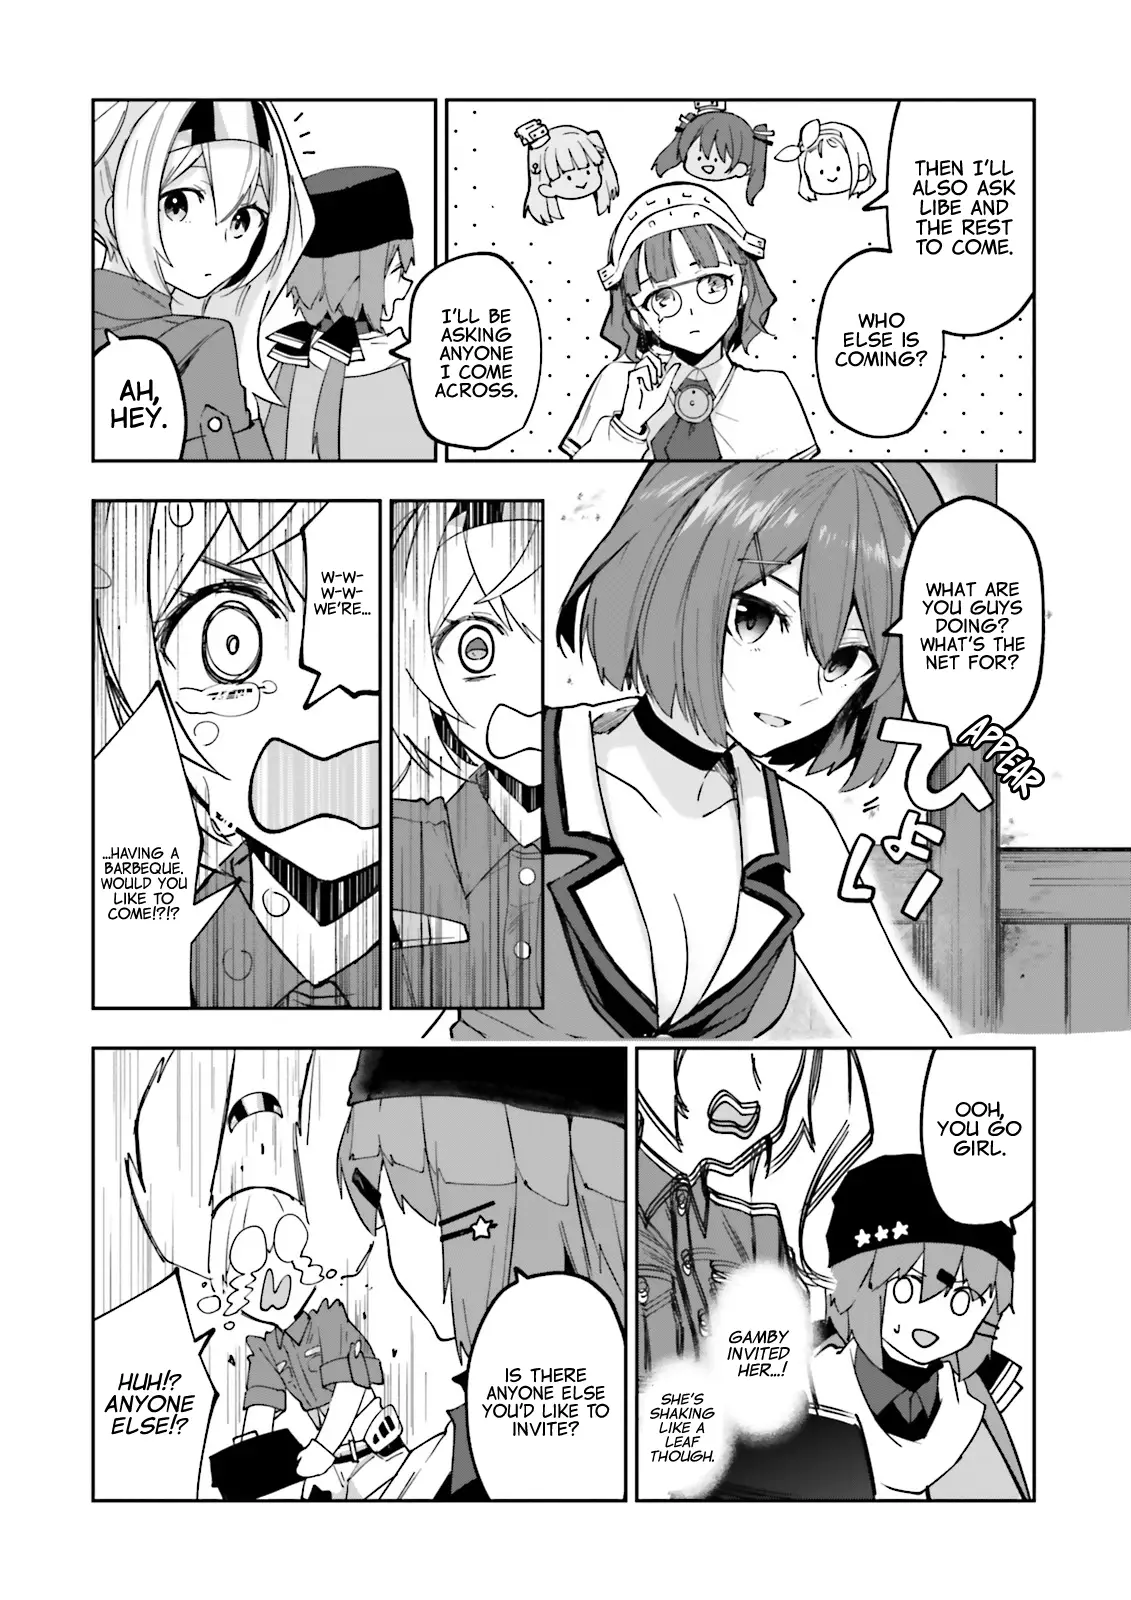 Kantai Collection -Kancolle- Tonight, Another "salute"! - 22 page 5-e5d4b781